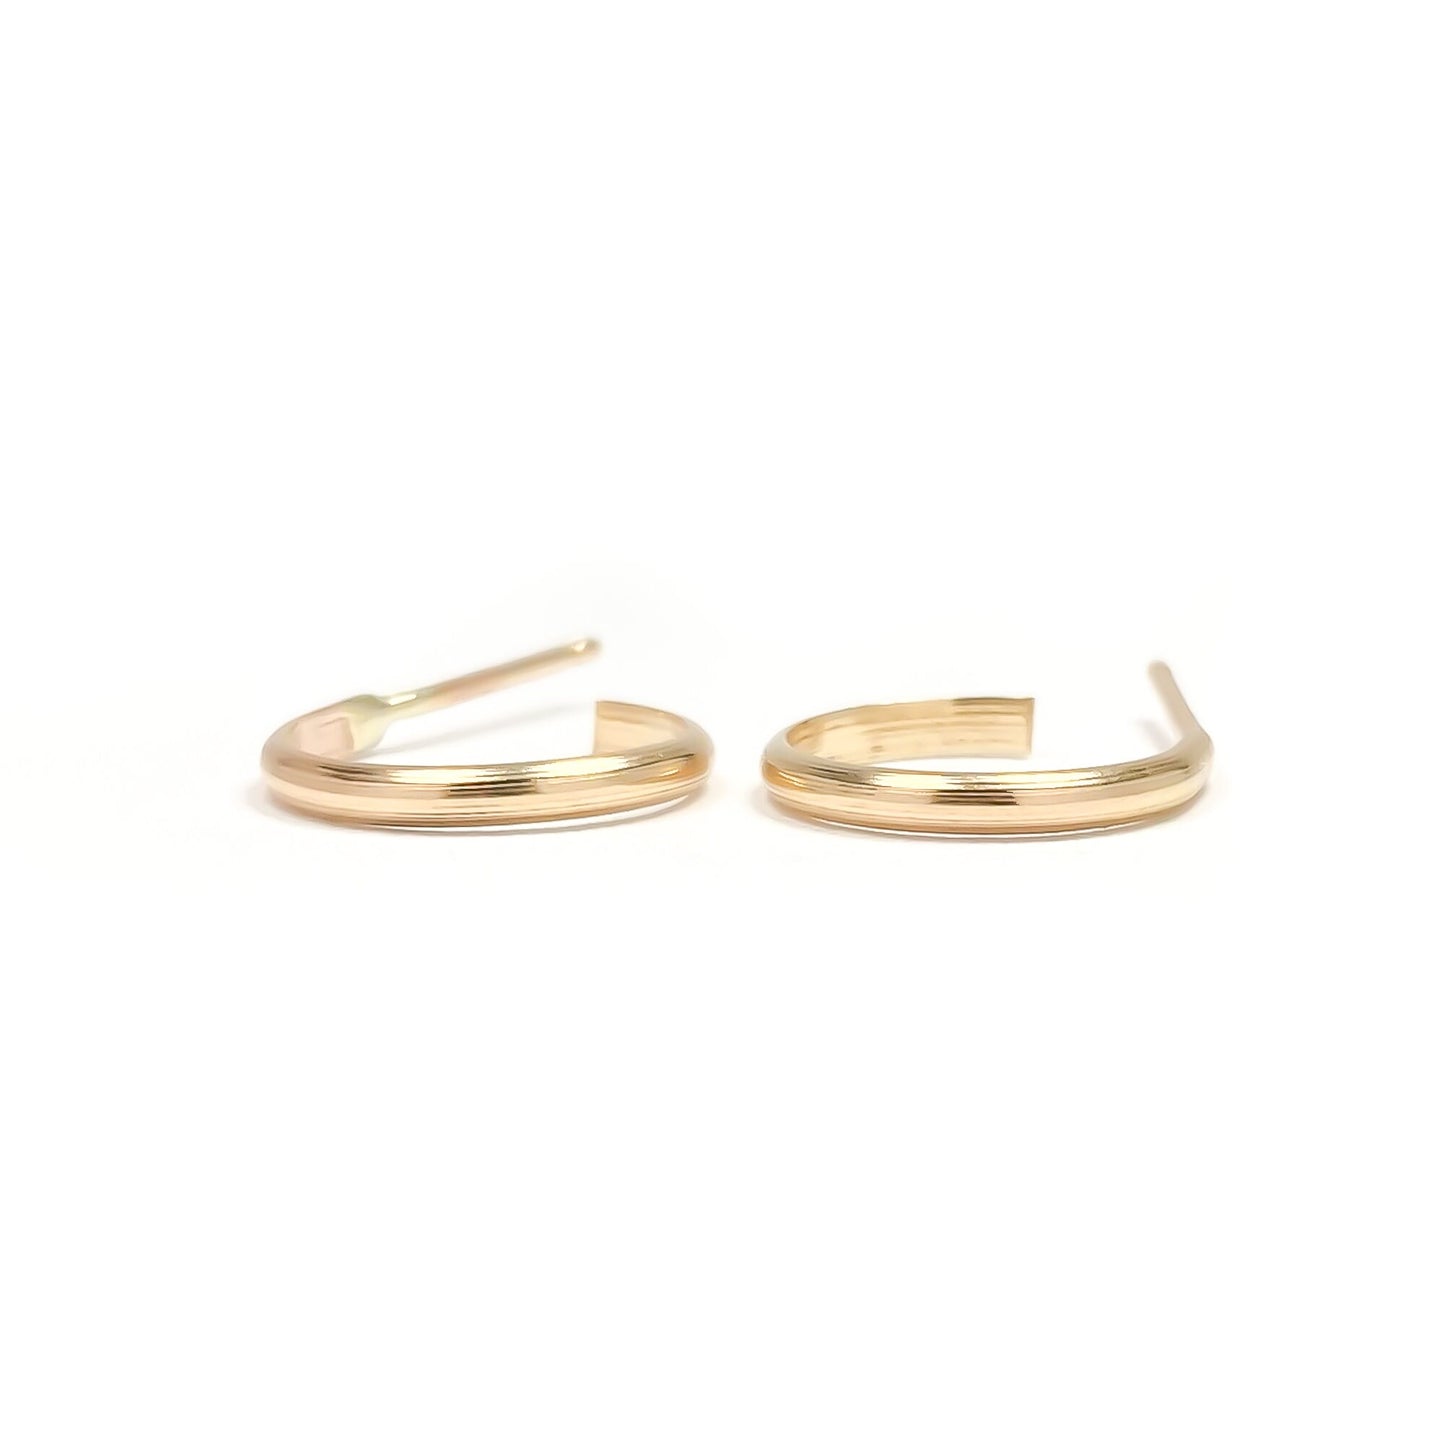 Hoop Earrings With Post, 14K Gold Filled